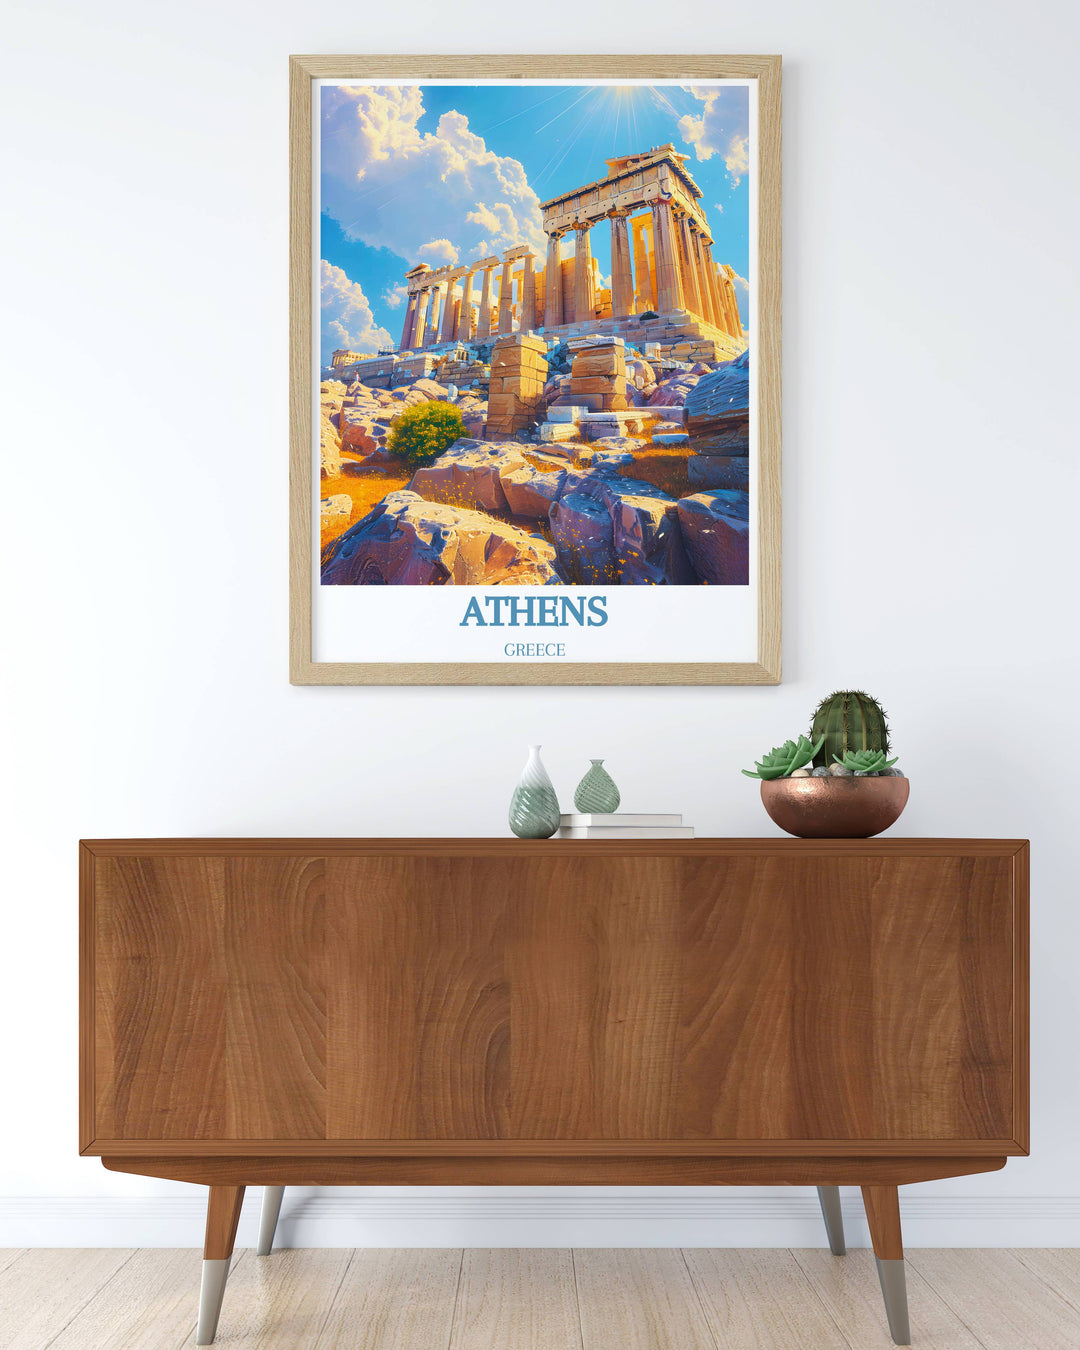 Acropolis surrounded by spring blooms, a picturesque scene captured in vivid detail in this beautiful wall decor.